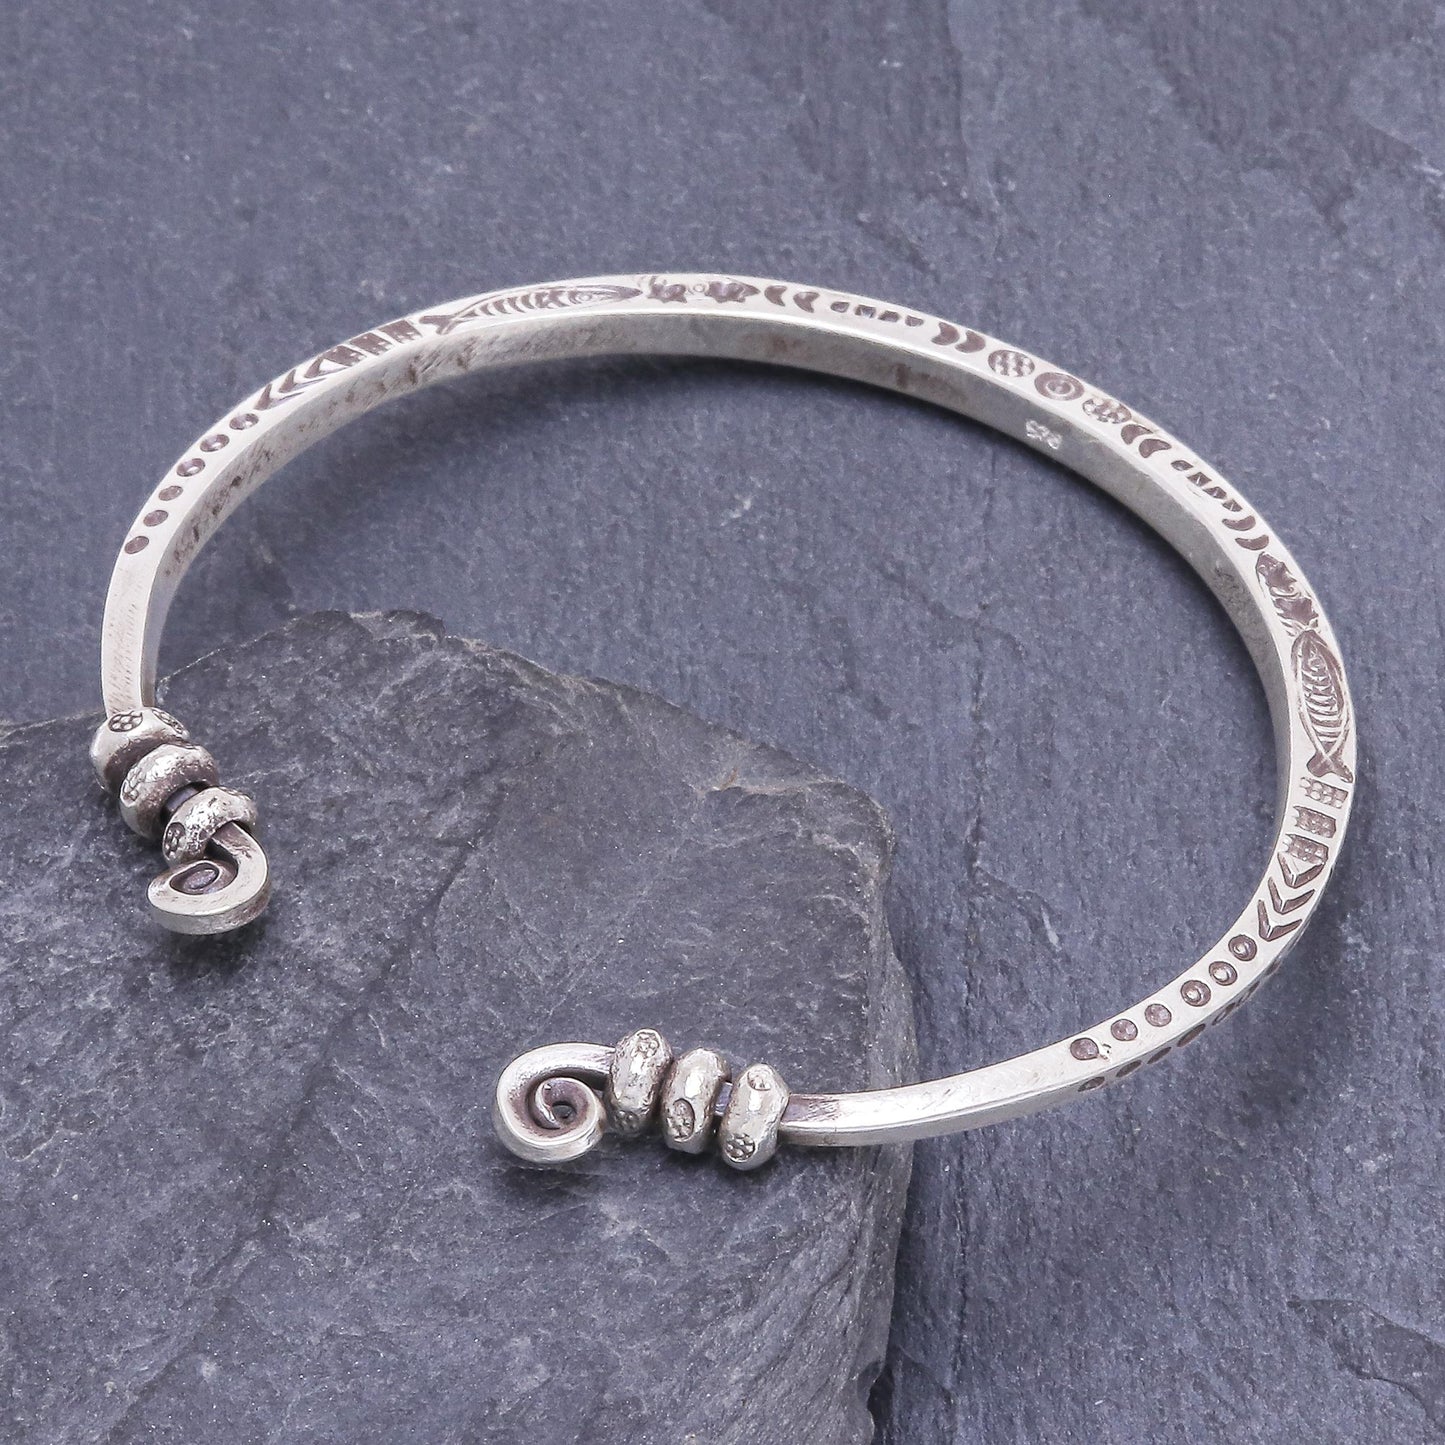 Beauty Mark Hand Crafted Sterling Silver Cuff Bracelet